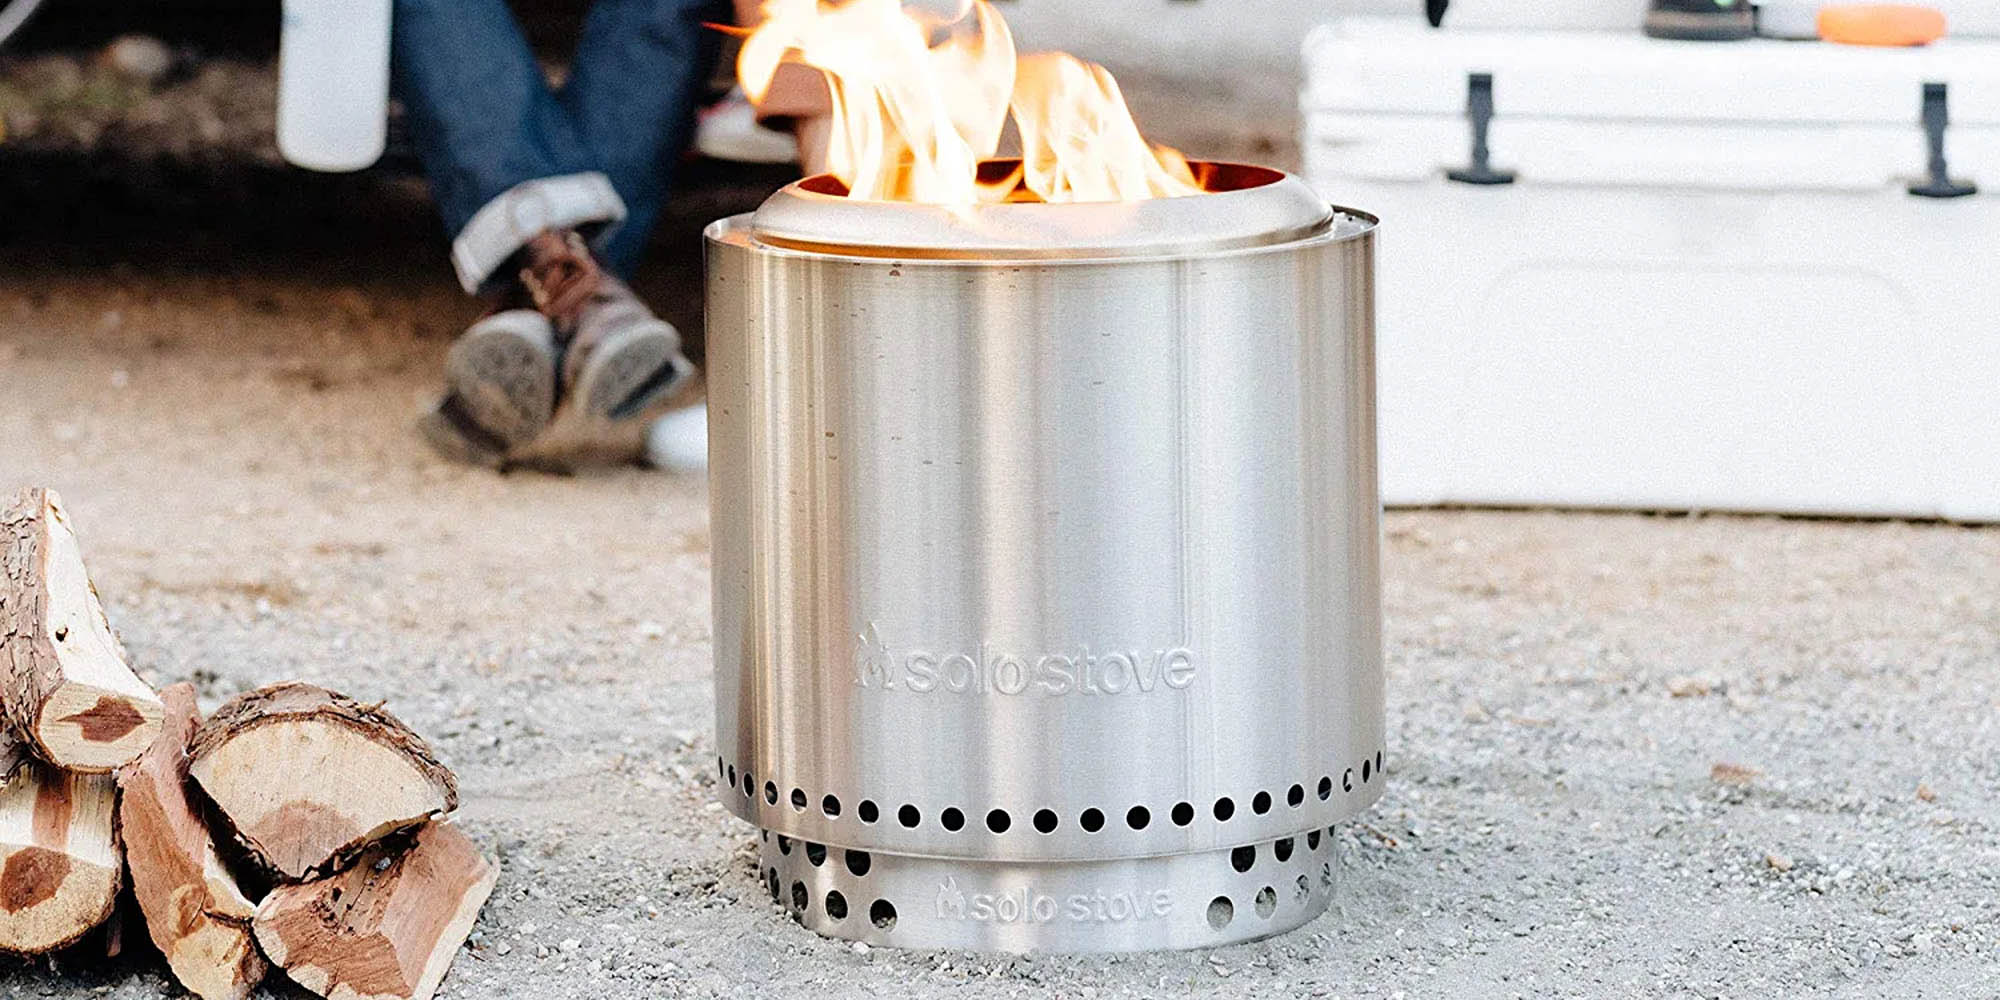 Solo Stove's latest Ranger 2.0 Fire Pit sees first 25% drop to new